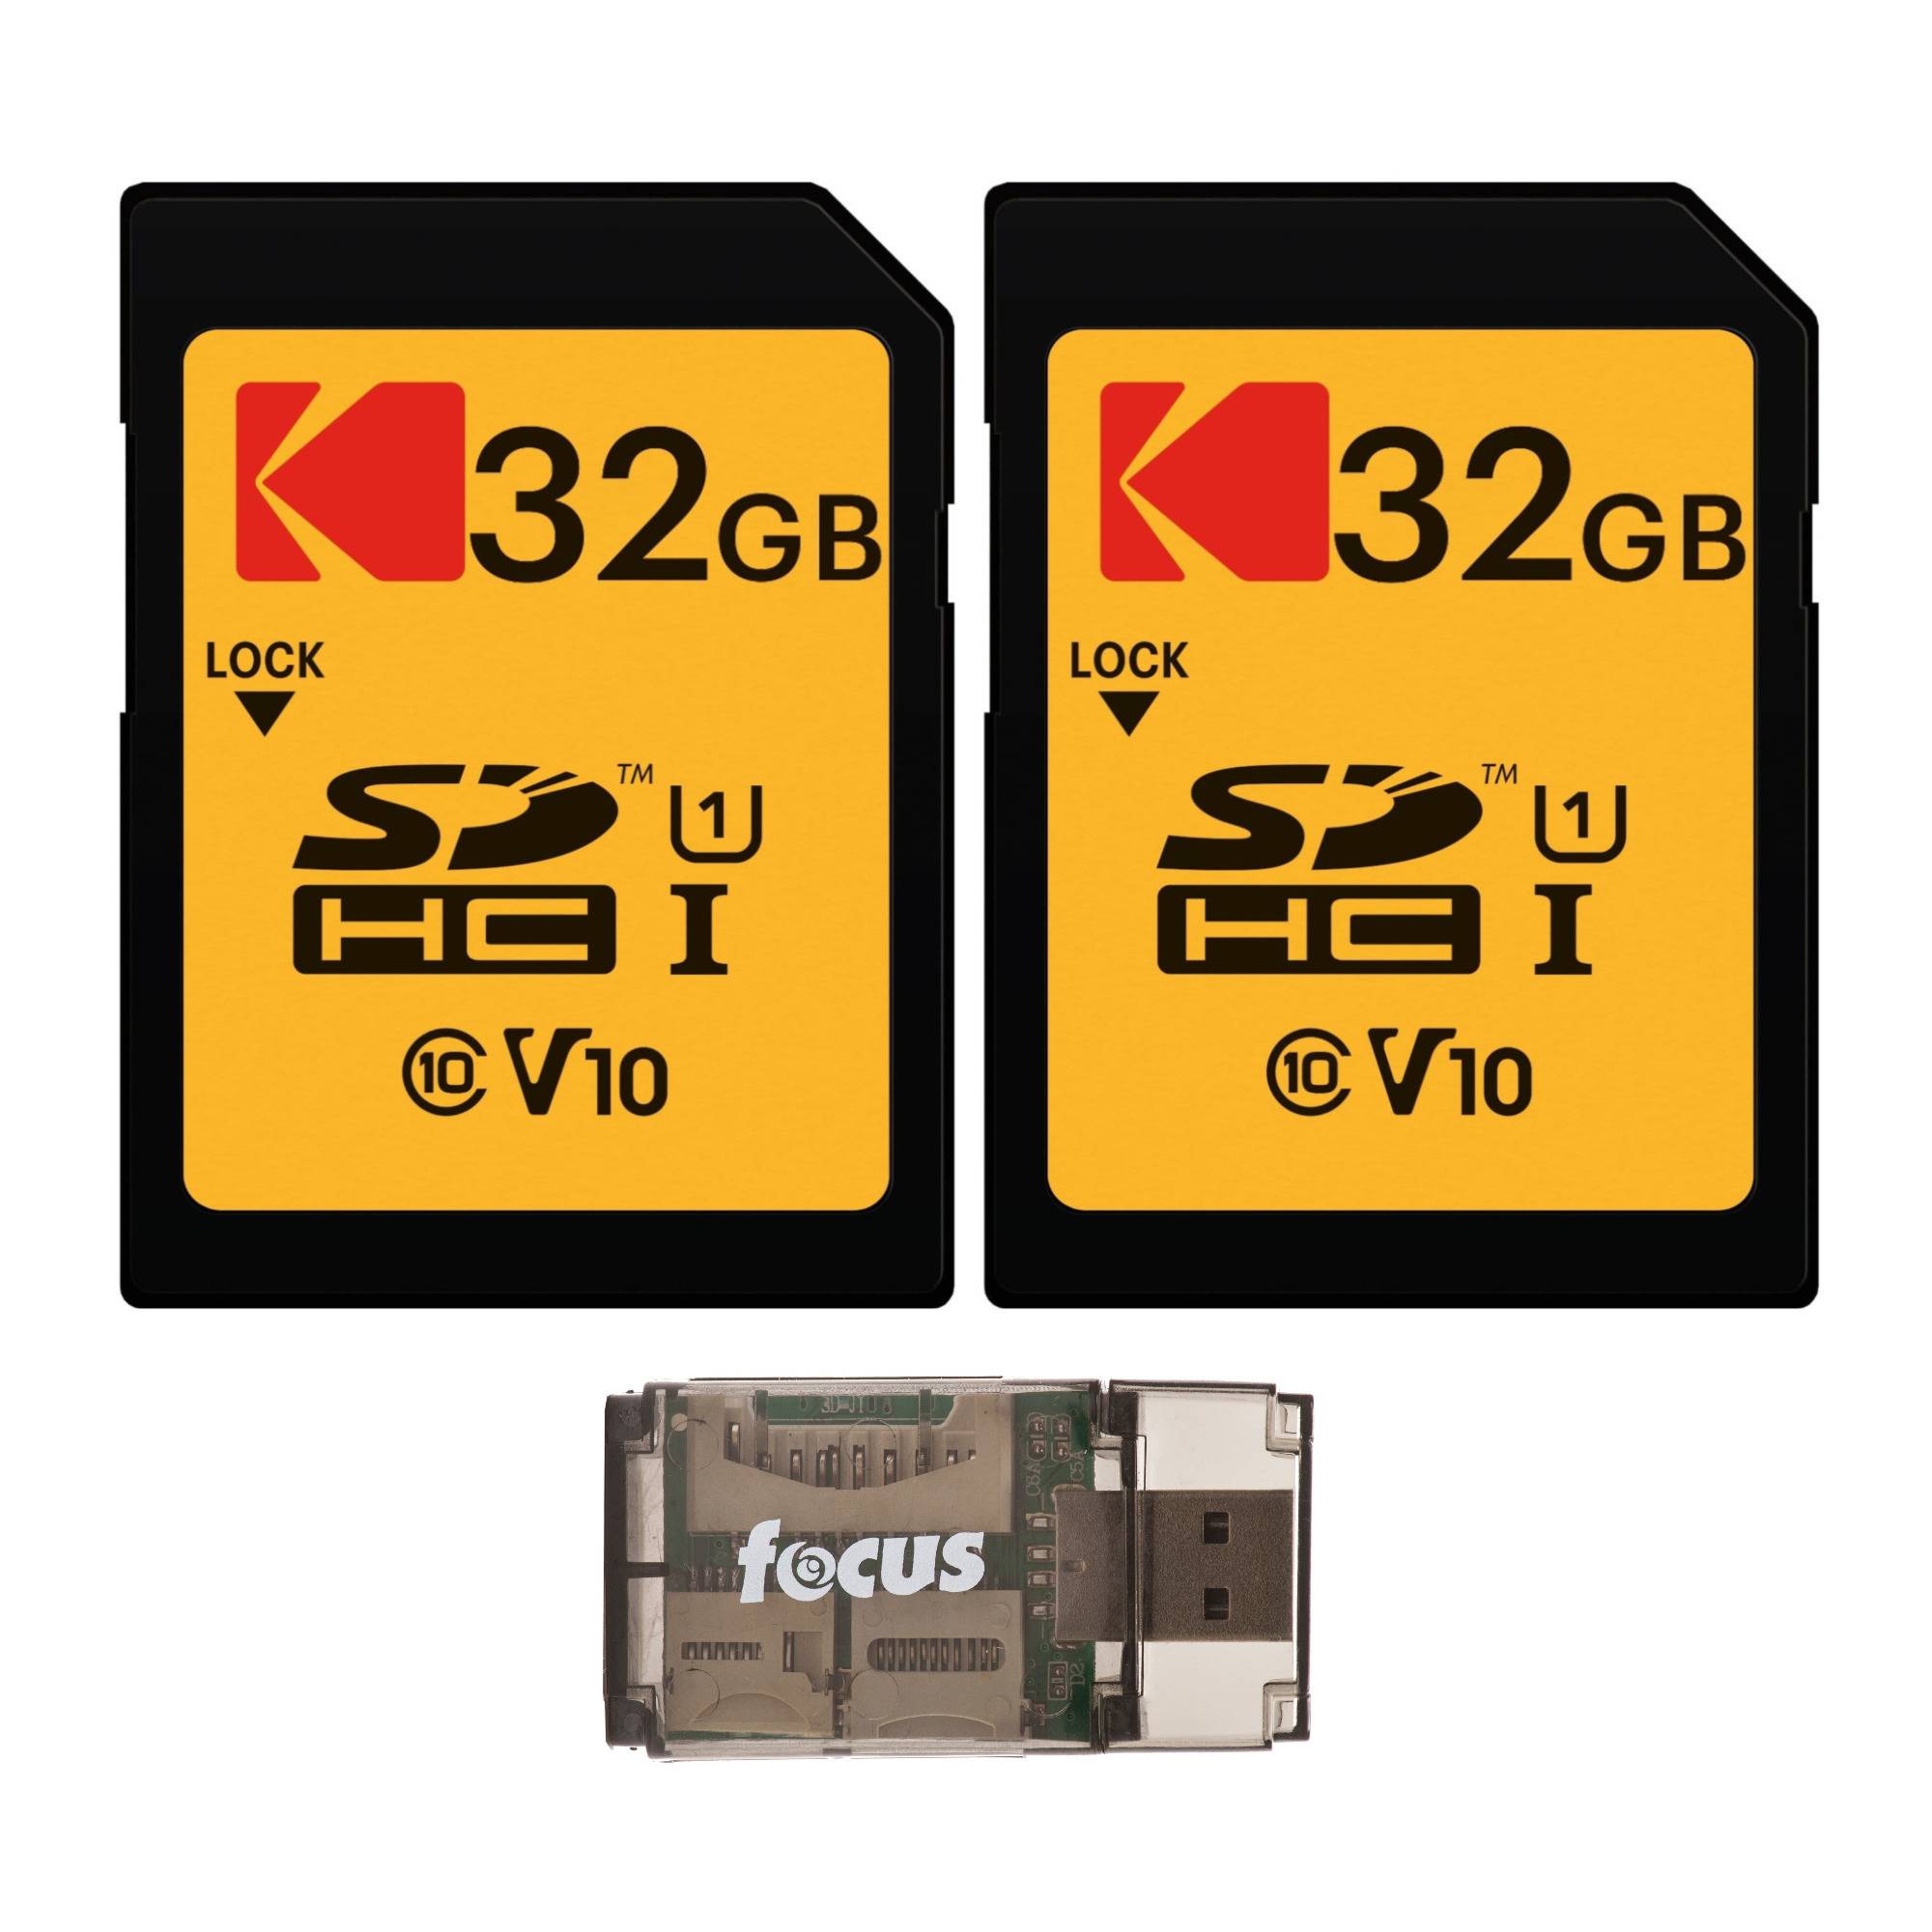 Kodak 32GB Class 10 UHS-I SDHC Memory Card (2 Pack) with Focus All-In-One High Speed USB Card Reader